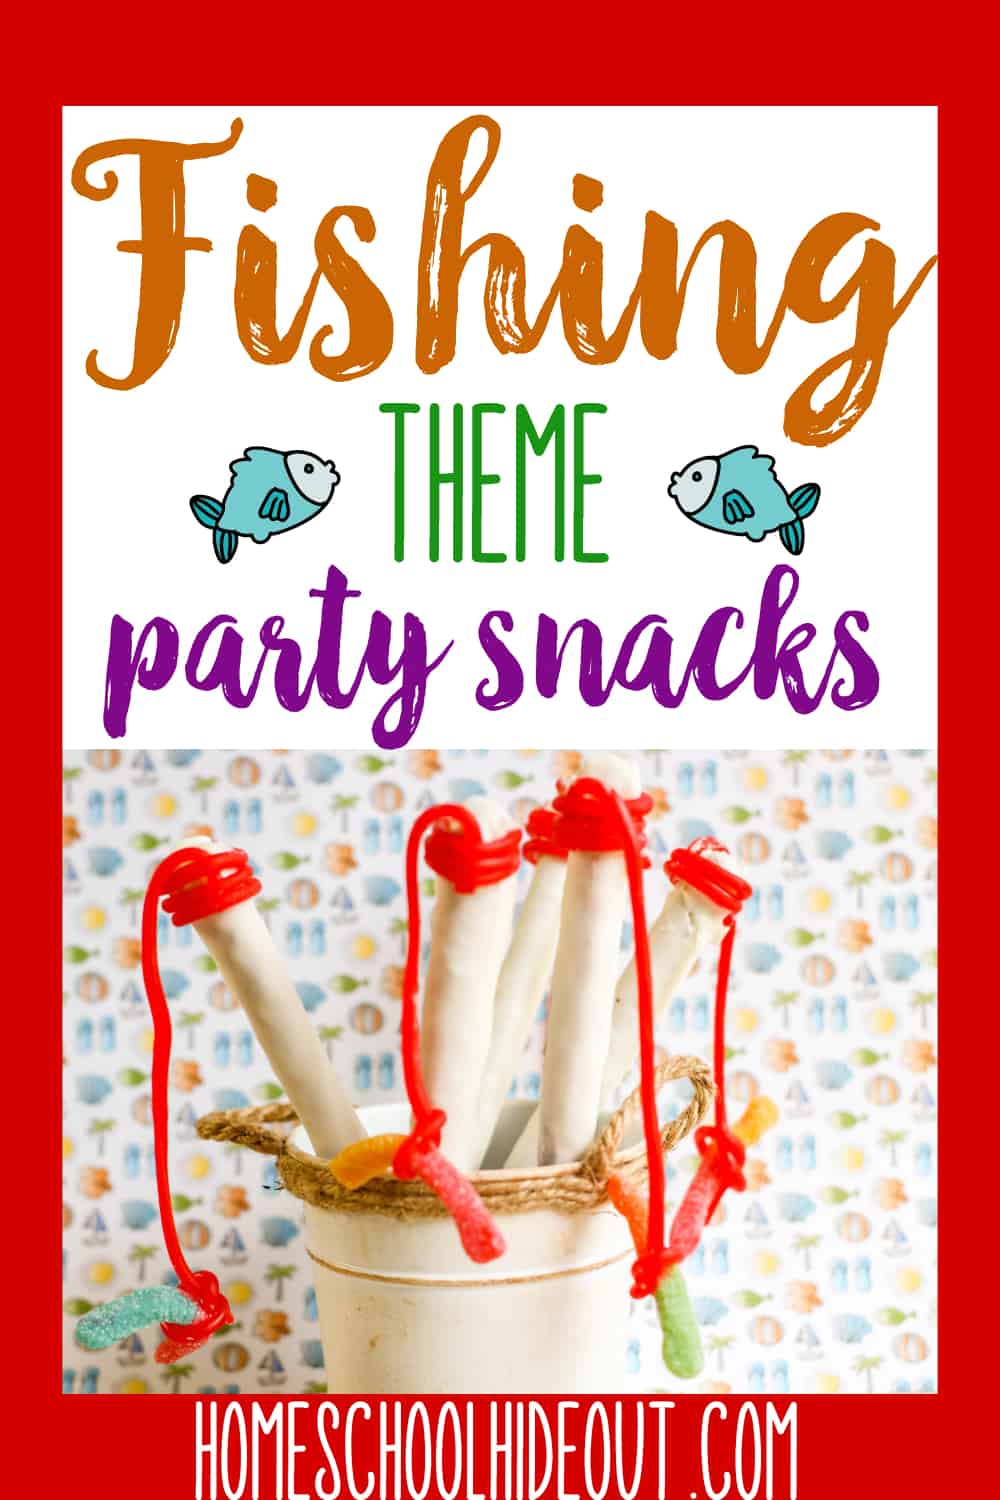 If you're looking for some yummy fishing party snacks, these pretzel rods are just what you need! #fishingparty #themedparty #kidsparties #pretzelrods